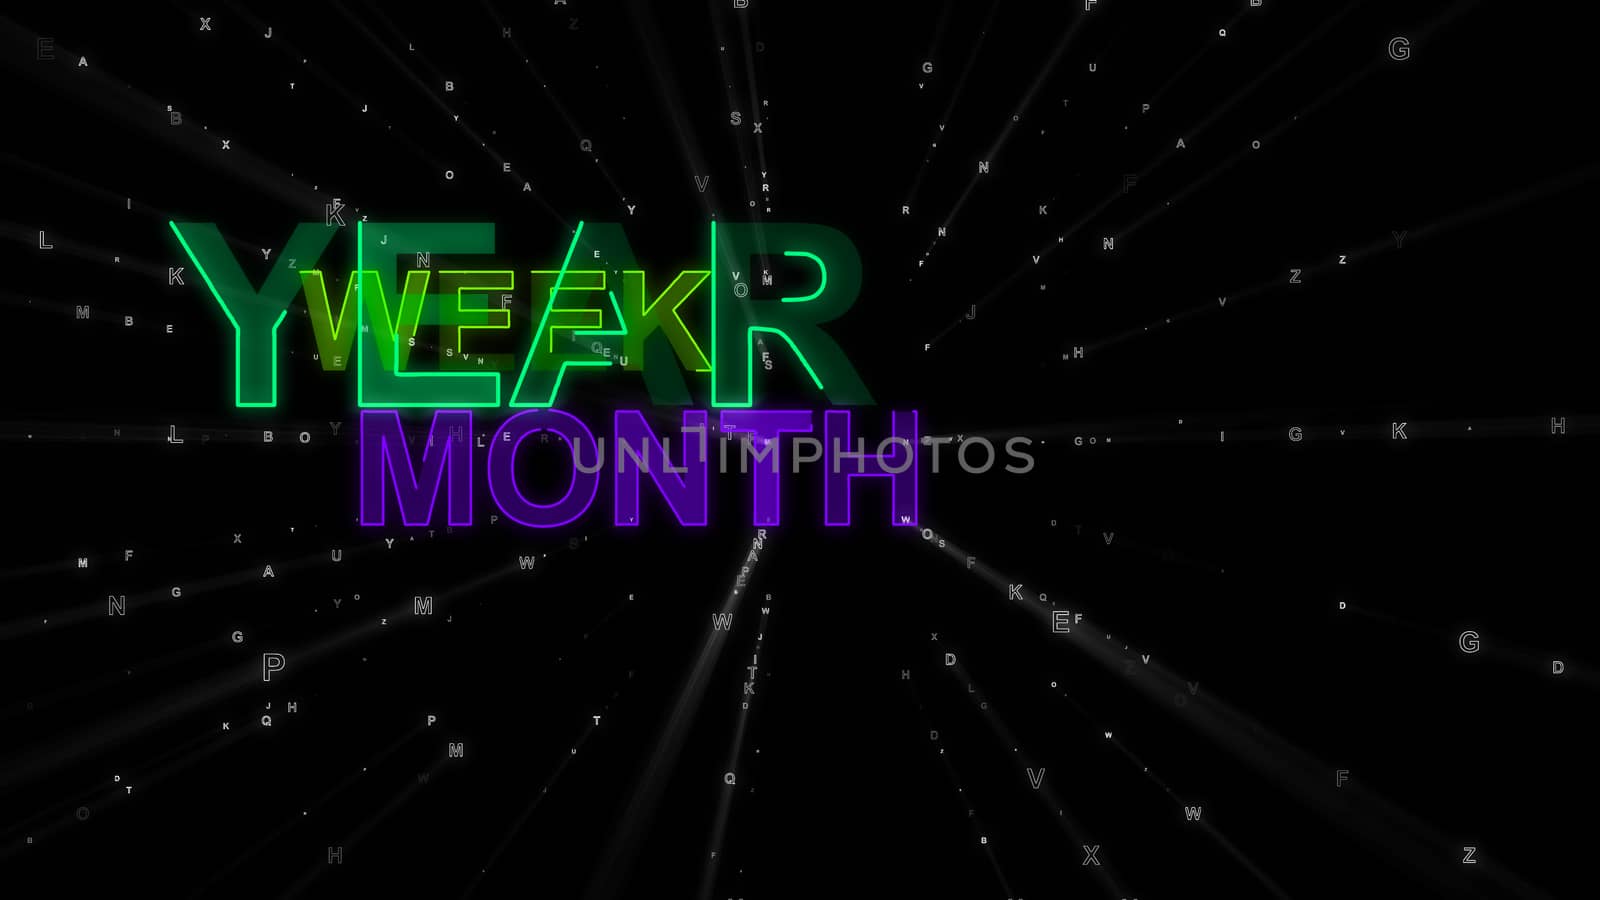 An effective 3d illustration of such concept words as year, week and month. They are violet, blue and green in the beaming black background. They remind about importance of planning.